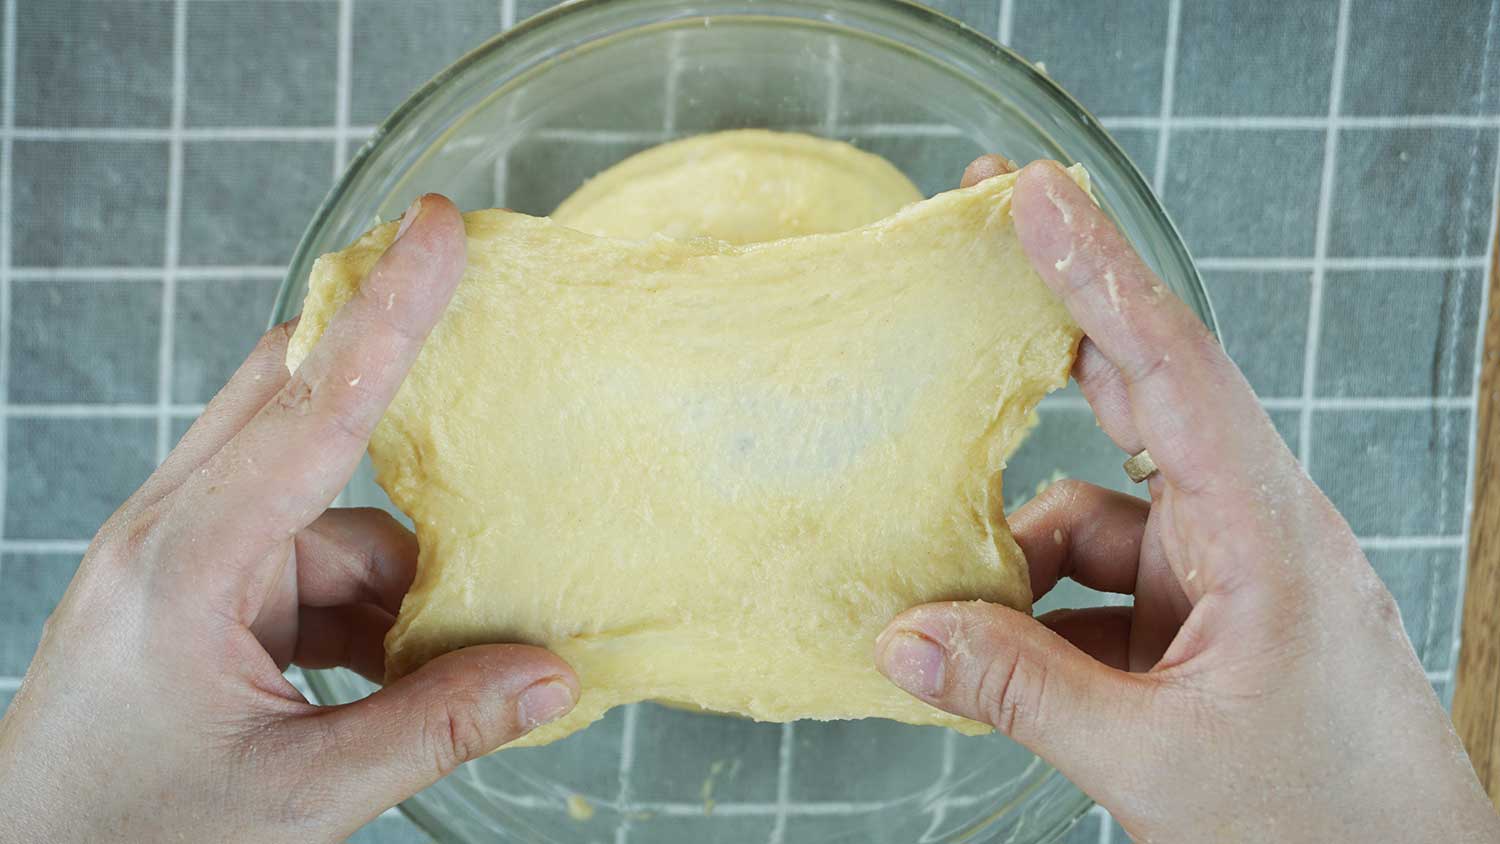 Knead the dough the right way to reach windowpane stage